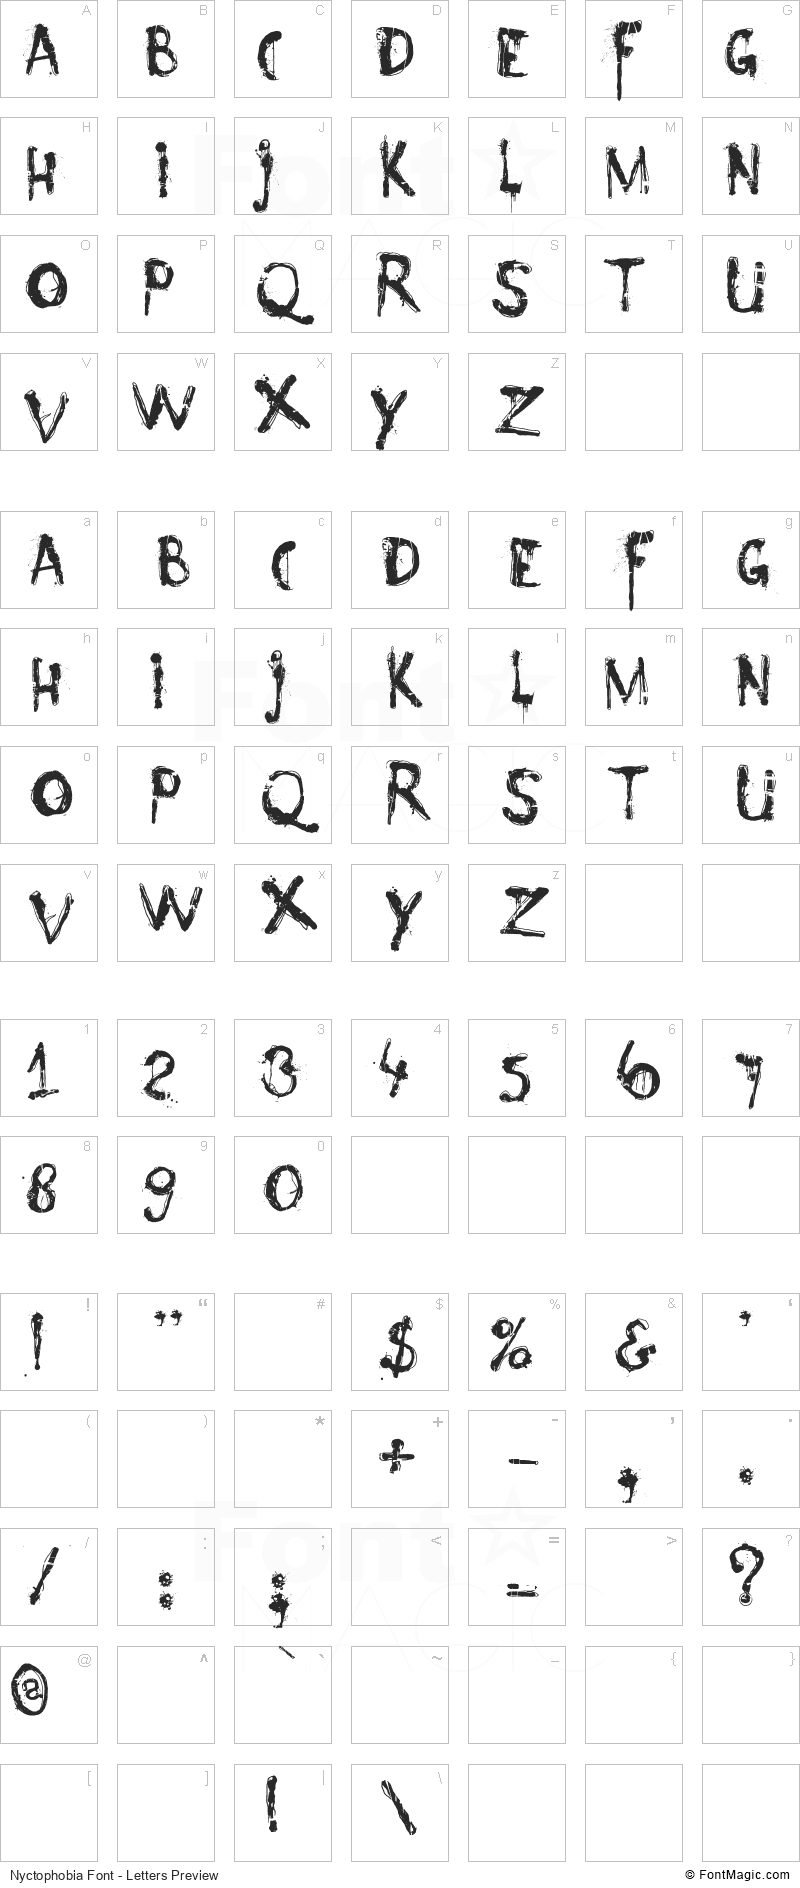 Nyctophobia Font - All Latters Preview Chart